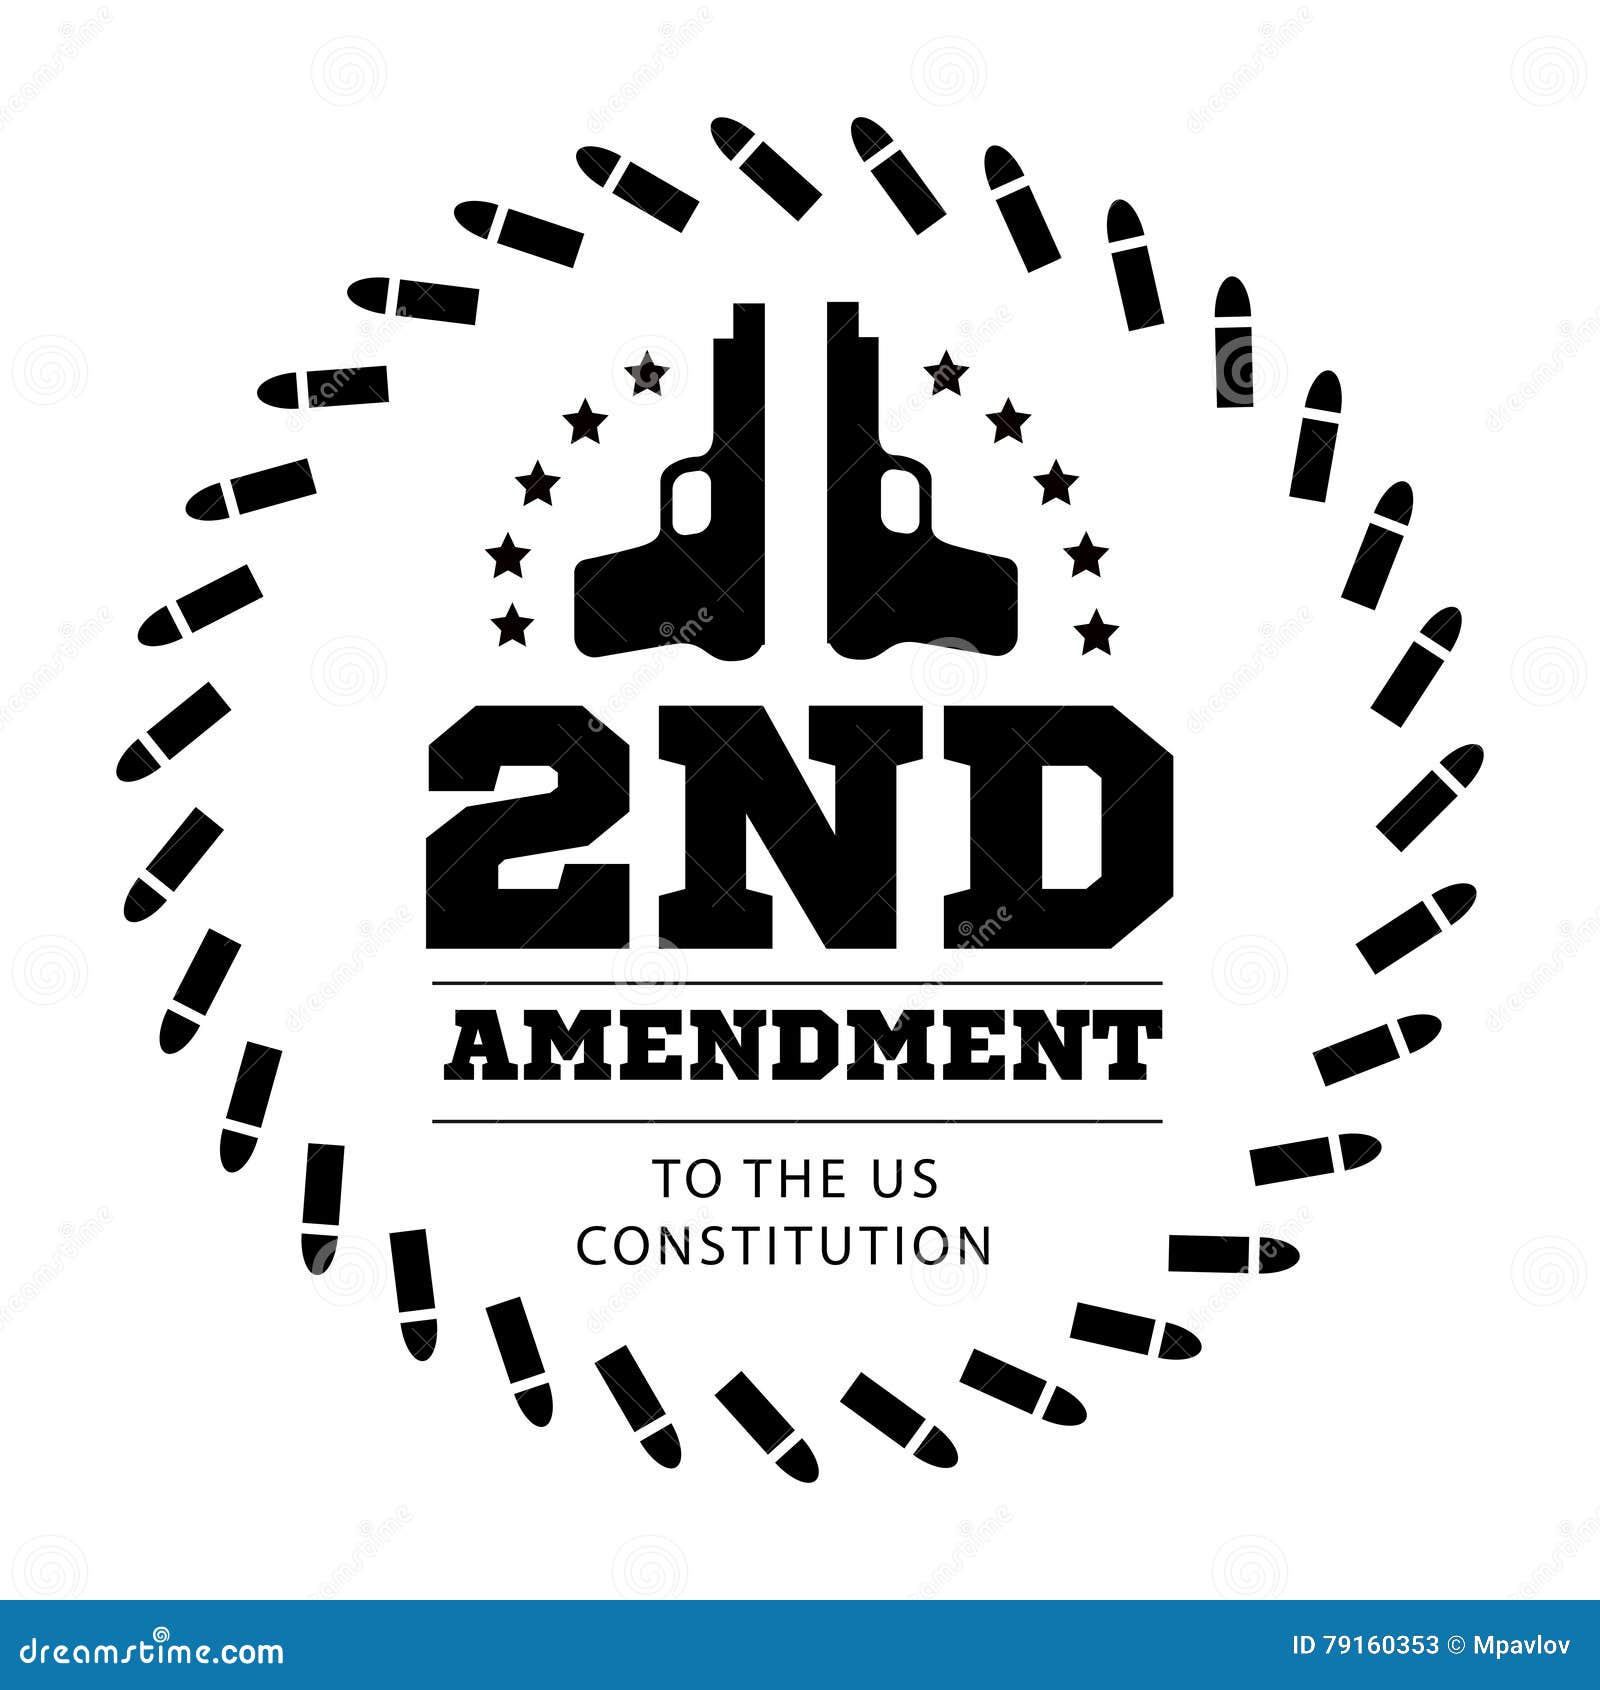 second amendment to the us constitution to permit possession of weapons.   on white